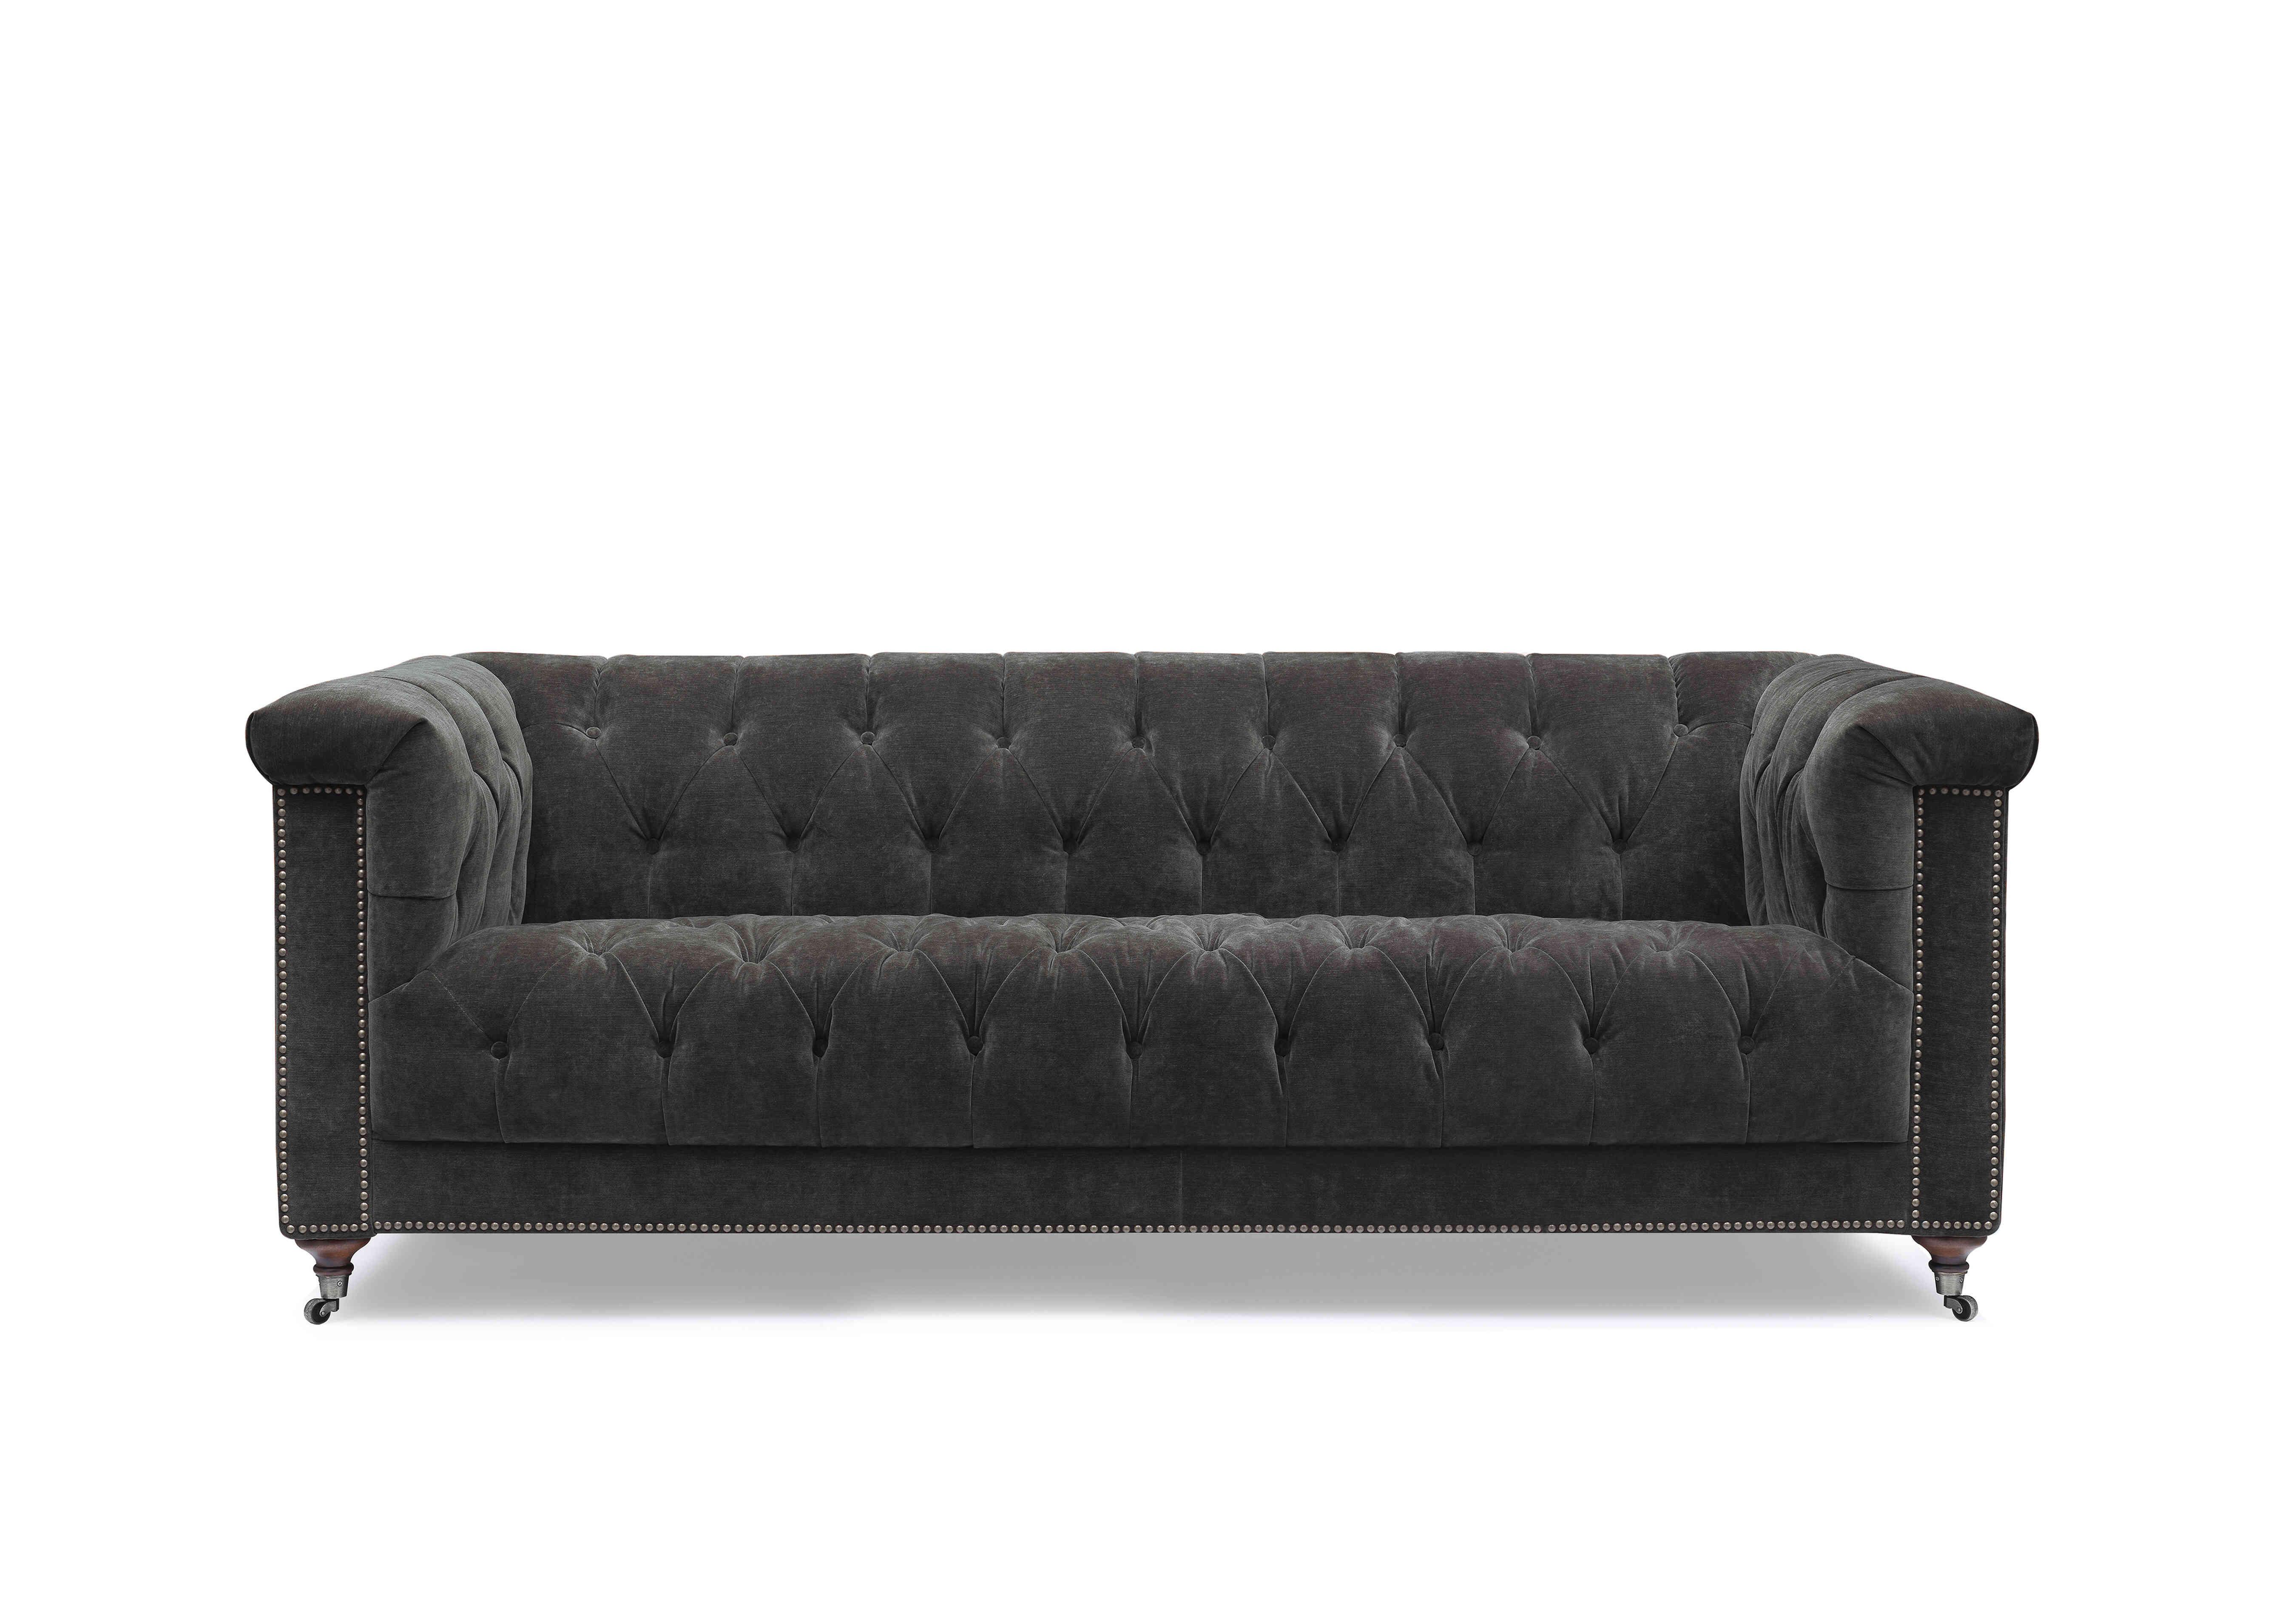 Wallace 3 Seater Fabric Chesterfield Sofa in X3y2-W021 Moonstone on Furniture Village